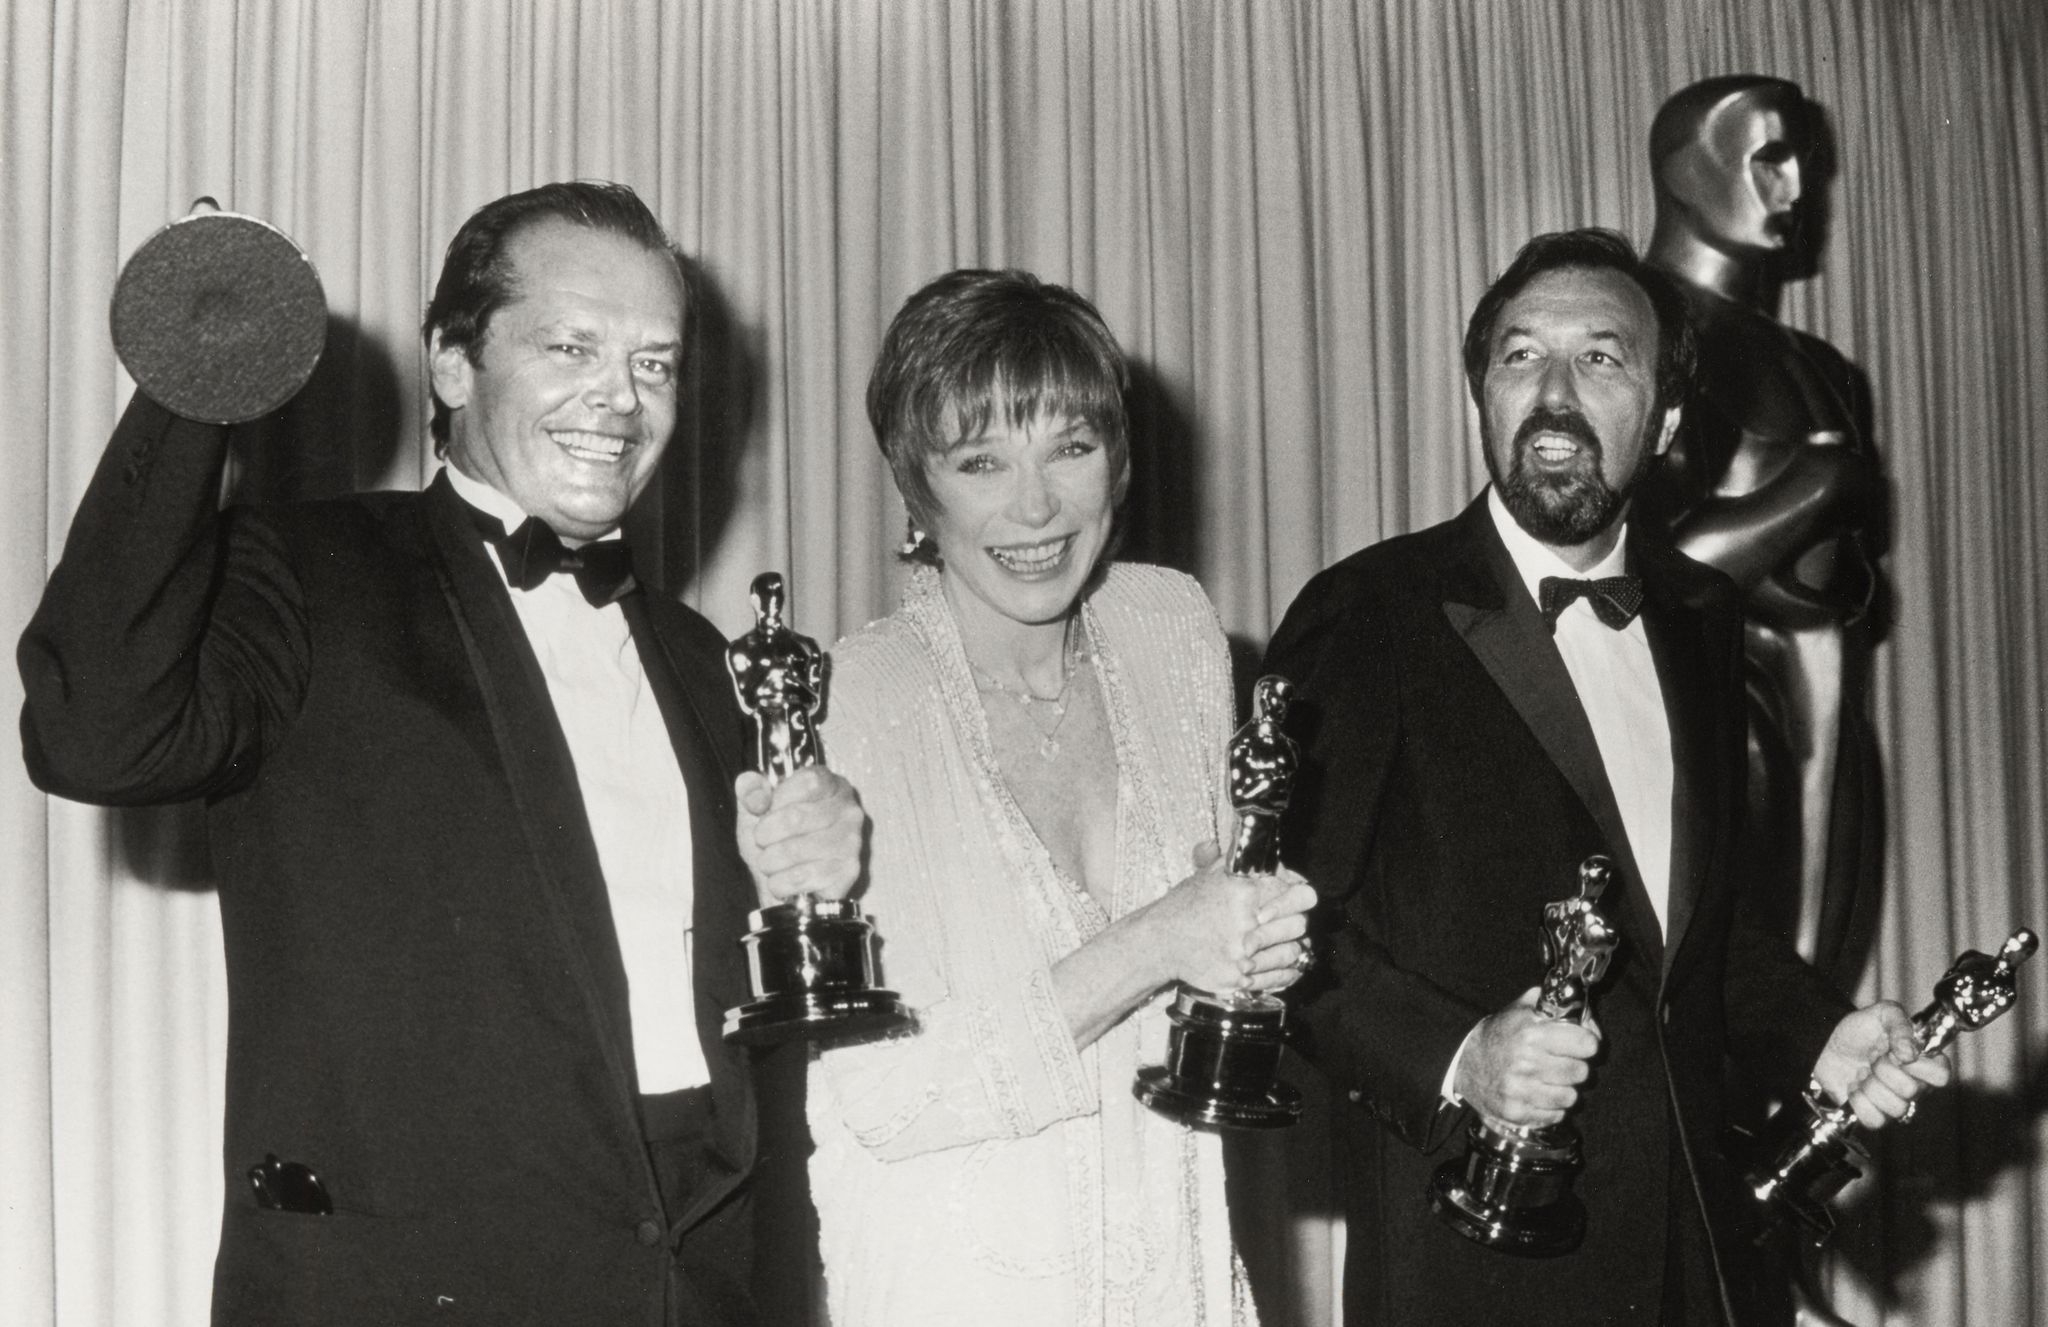 jack nicholson, shirley maclaine and james l brooks, winners for terms of endearment photo by ron galellaron galella collection via getty images